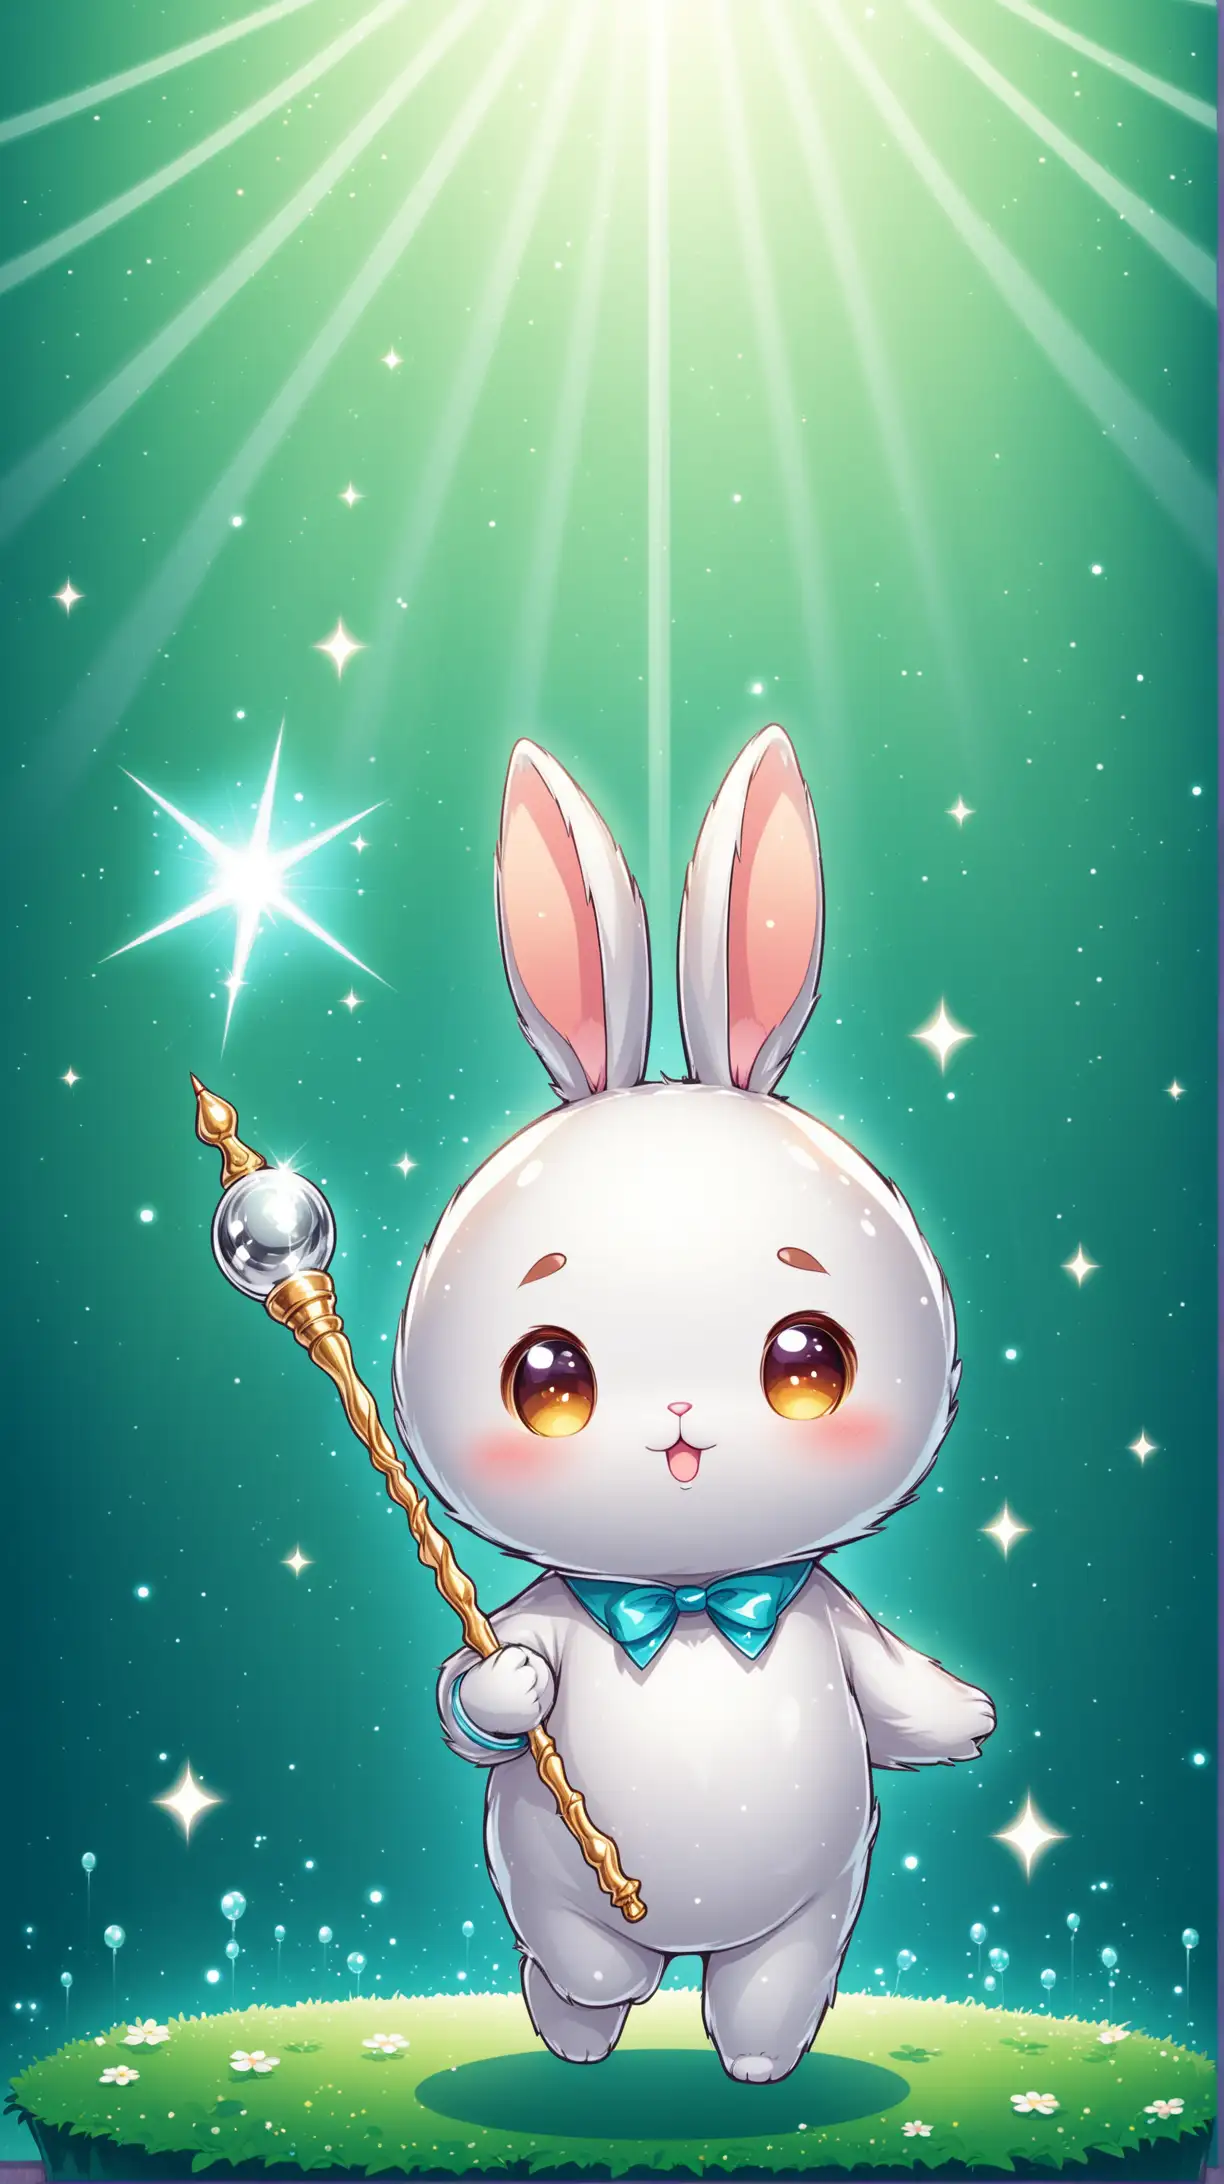 Cute rabbit cartoon character whose body is made from silver , carry wand, mysterious background 